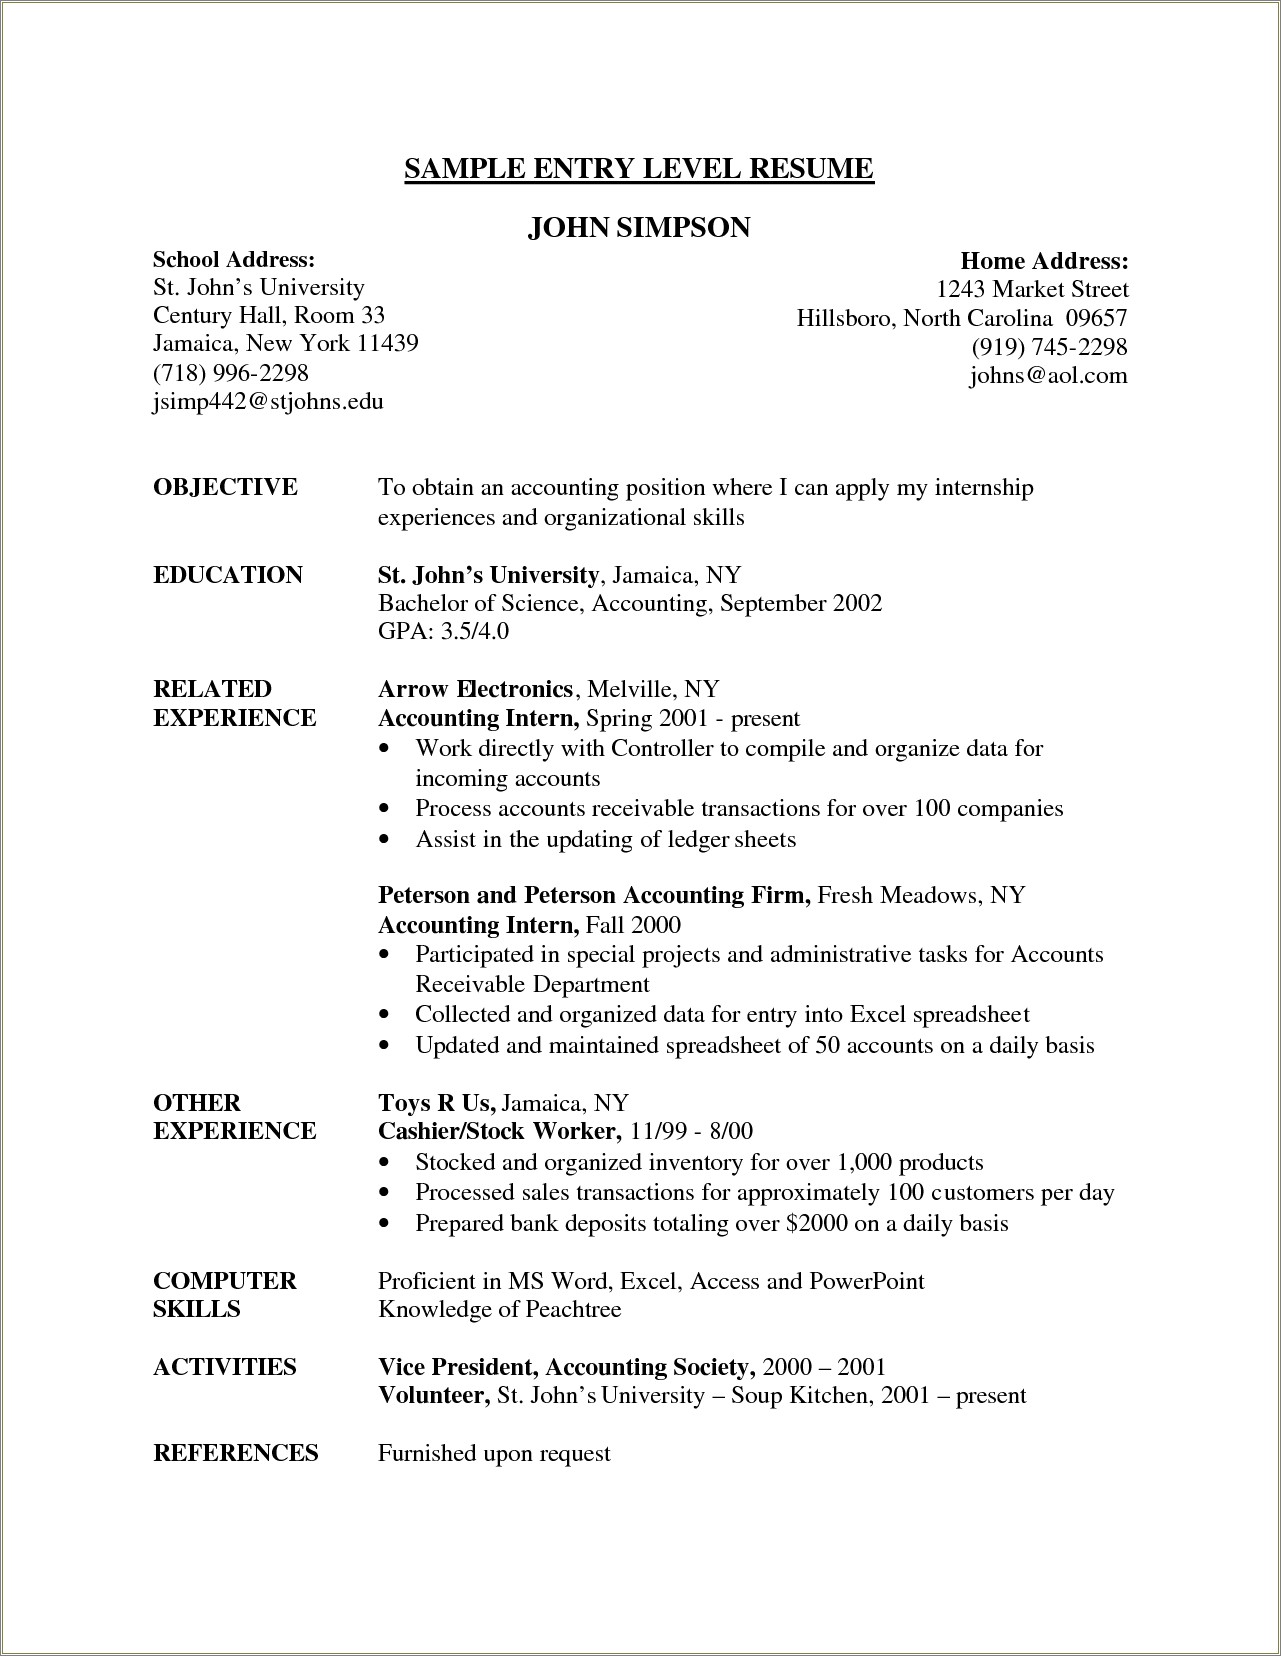 Resume Objectives For Entry Level Sales Positions